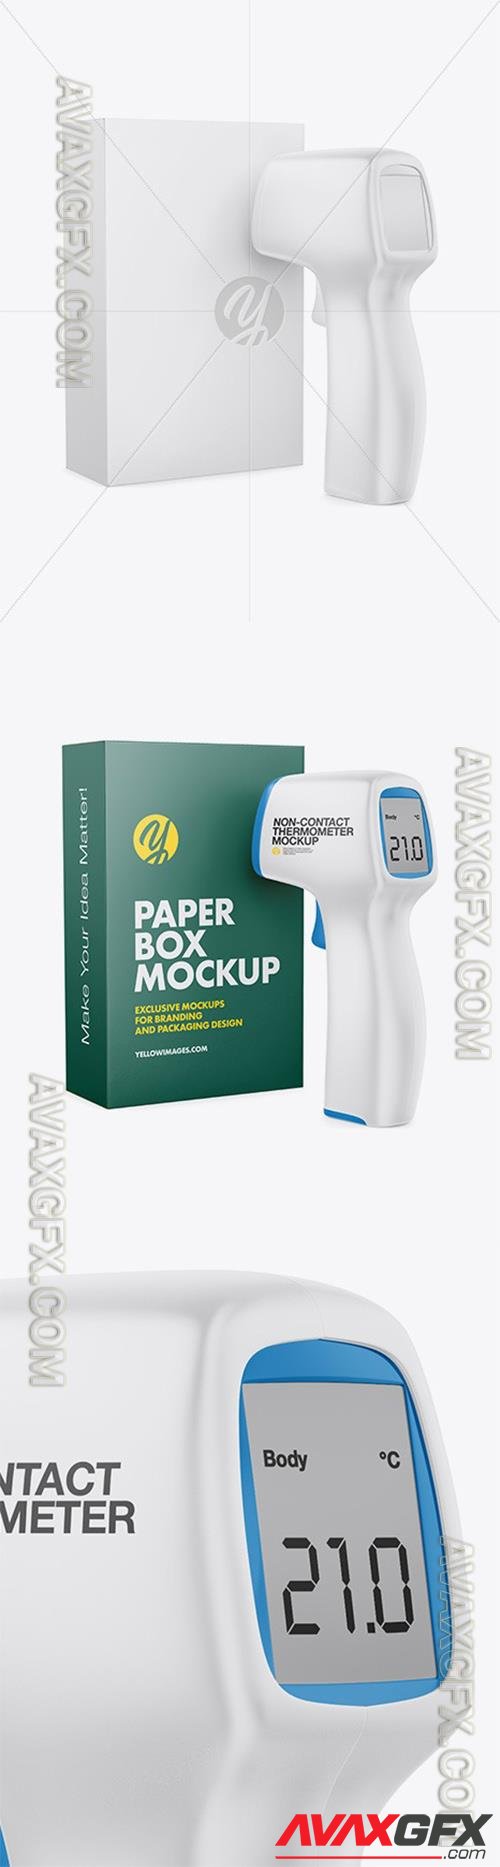 Non-contact Infrared Thermometer with Paper Box Mockup - Half Side View 64051 TIF